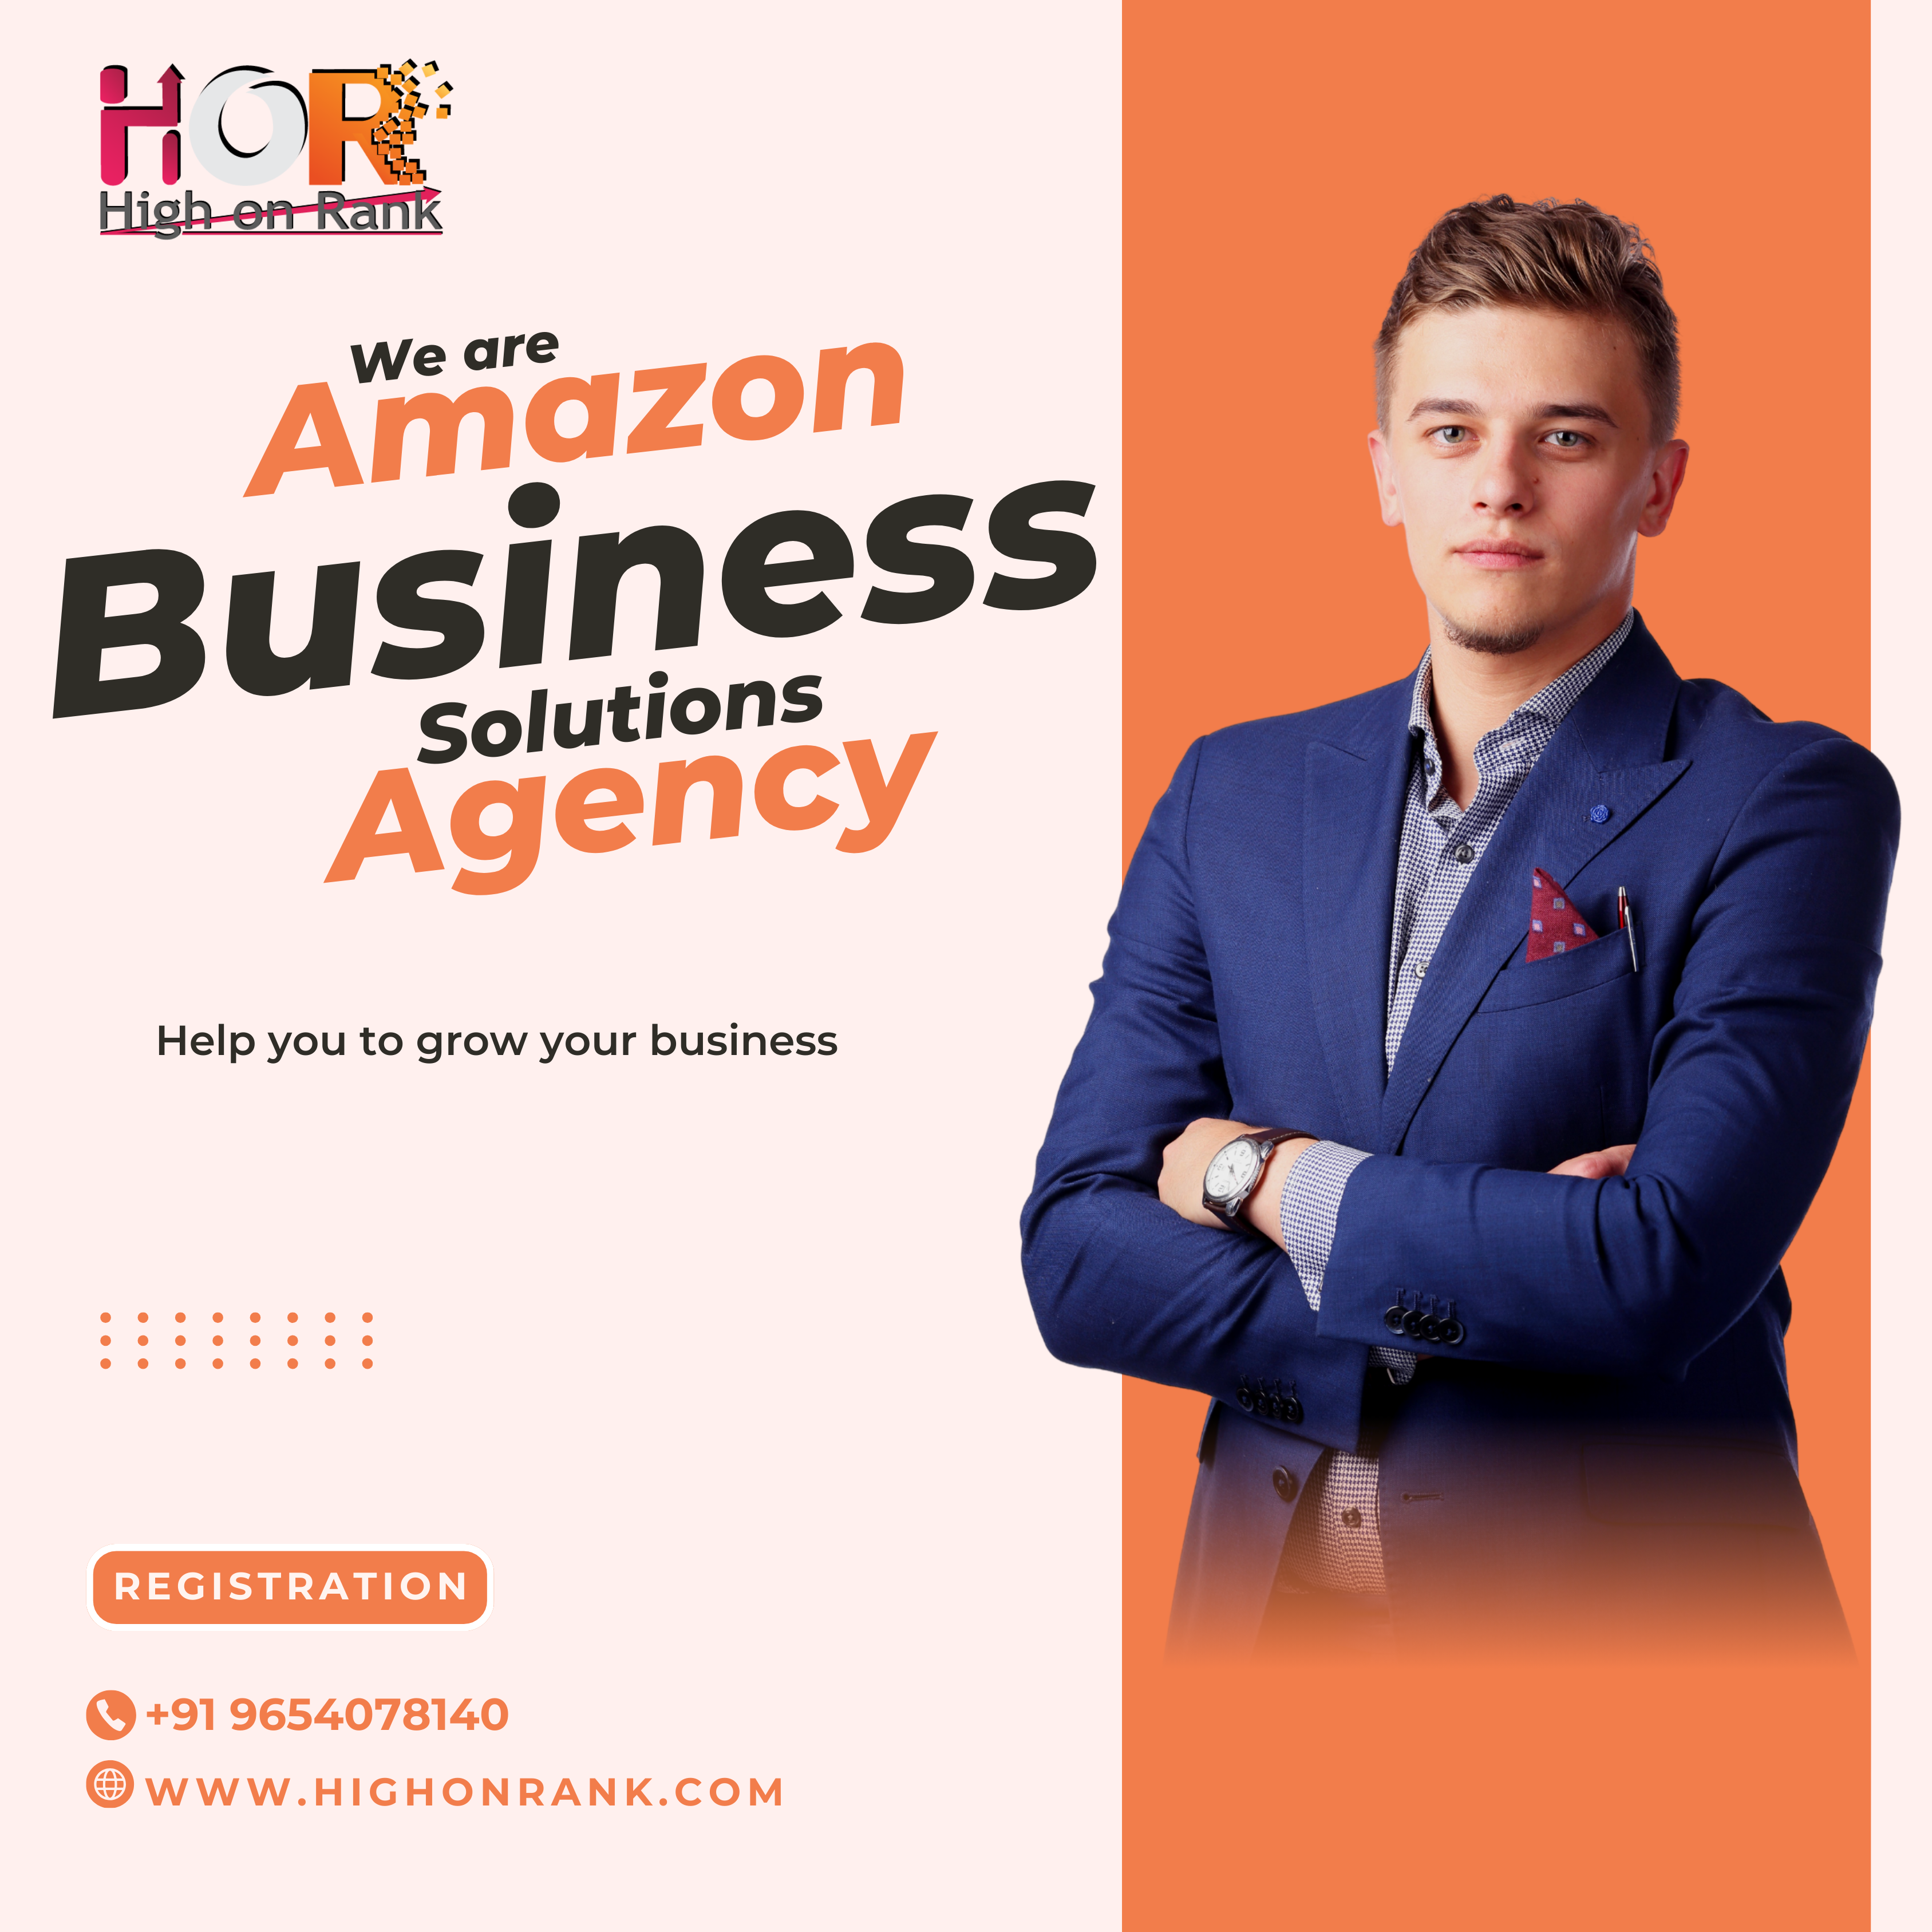 amazon seller account management service companies in hawaii usa amazon consulting services company best amazon paid account manager agency